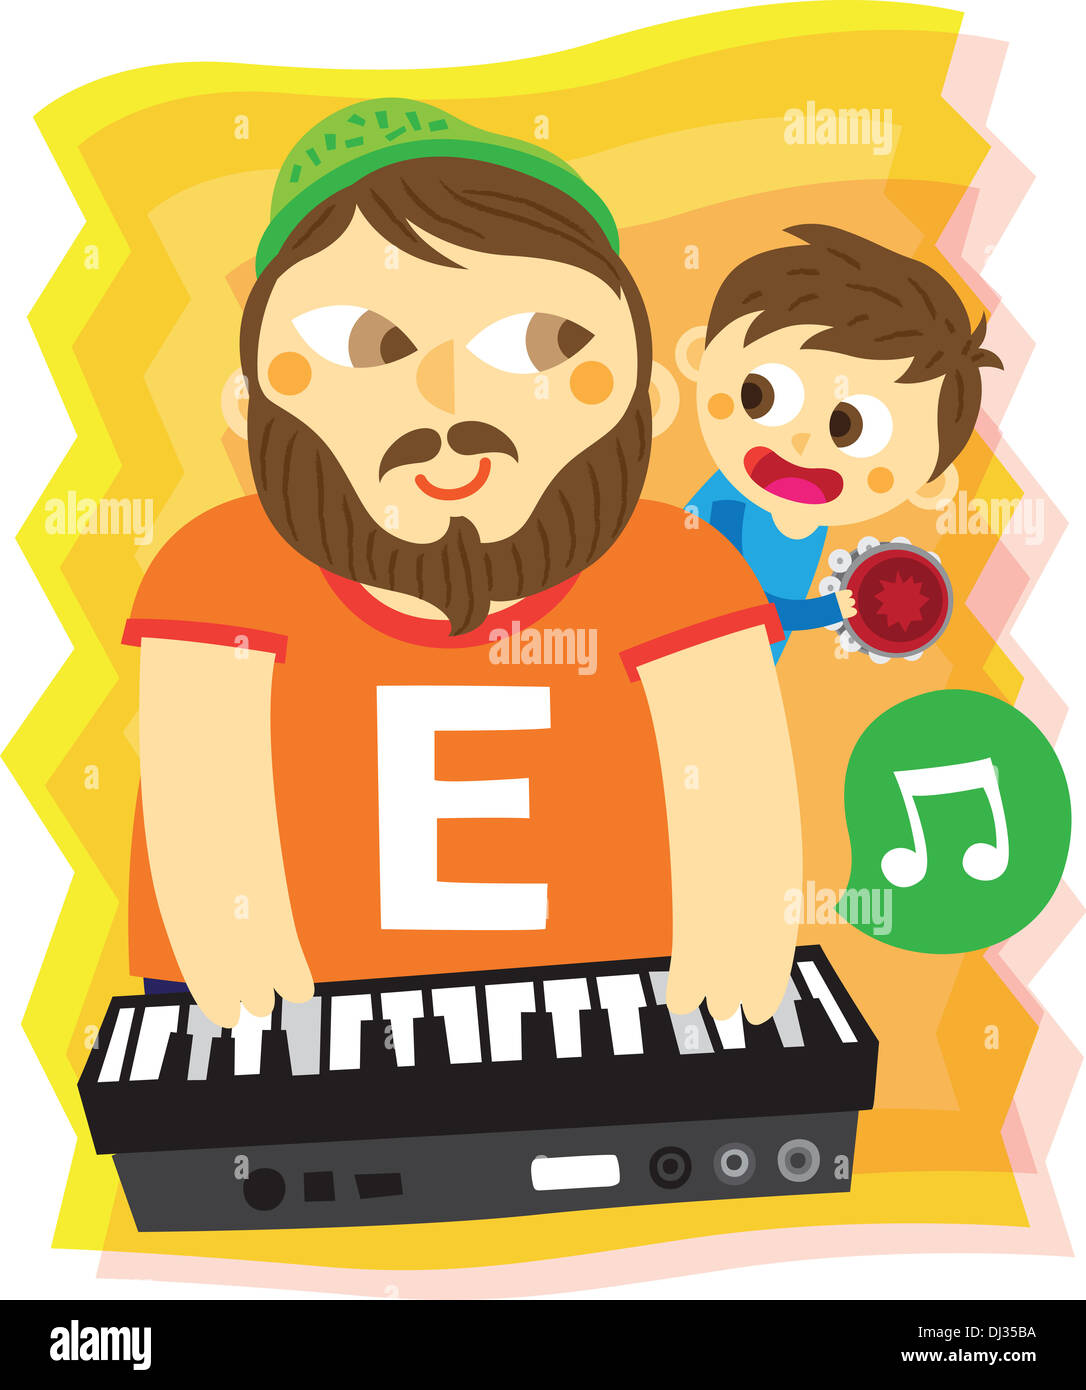 Illustration of father and son playing musical instrument while learning letter E Stock Photo